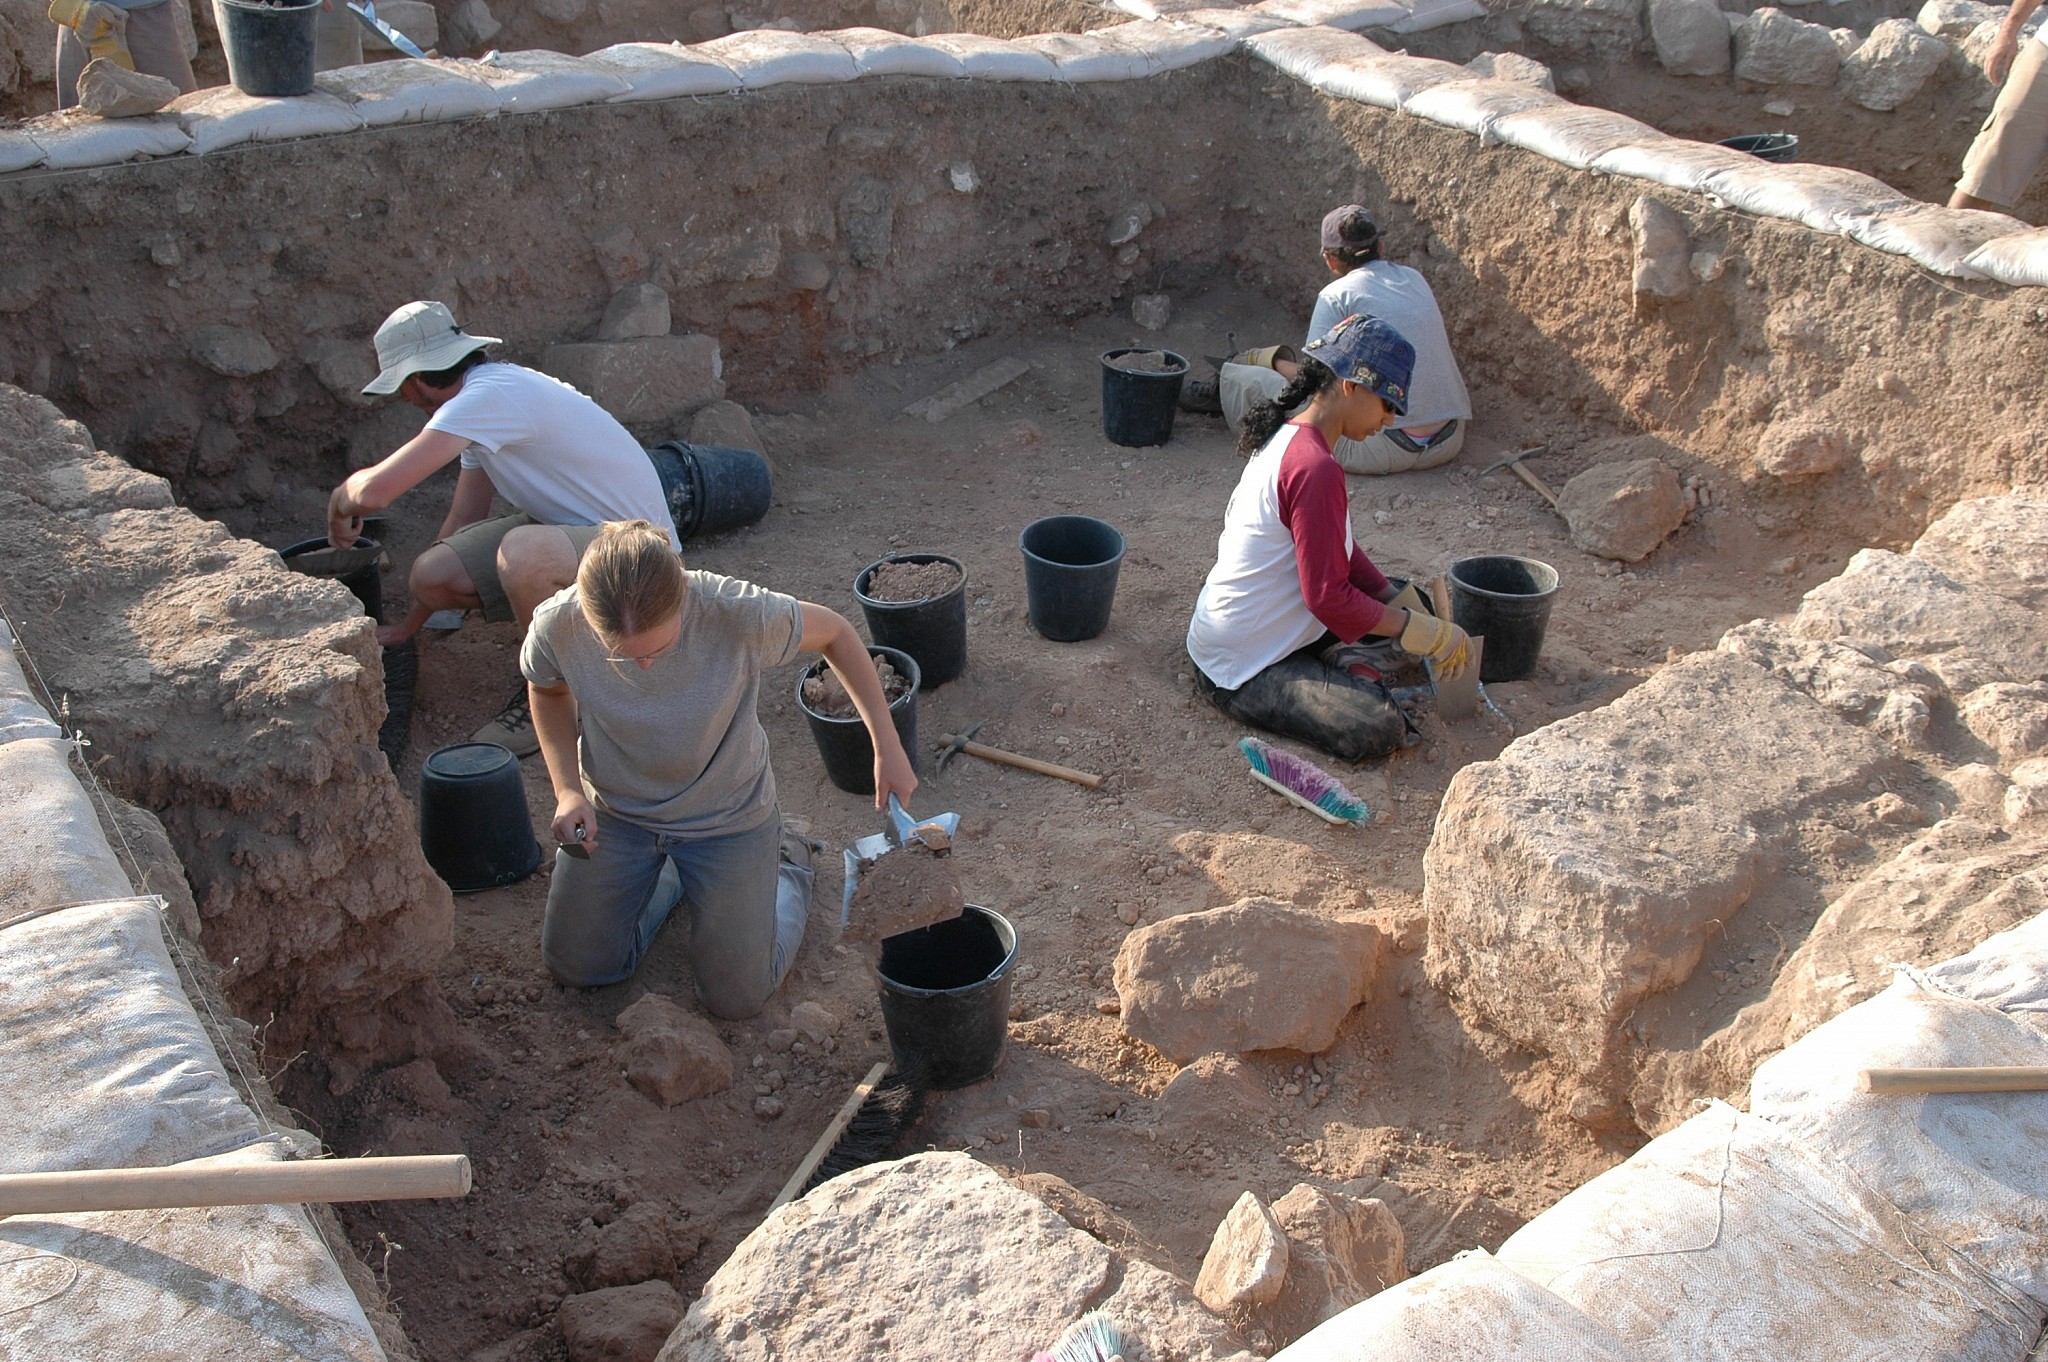 The team working at the Tel 'Eton archaeological excavation in Israel's Shphelah region. (Courtesy Avraham Faust/ Tel 'Eton Archaeological Expedition)